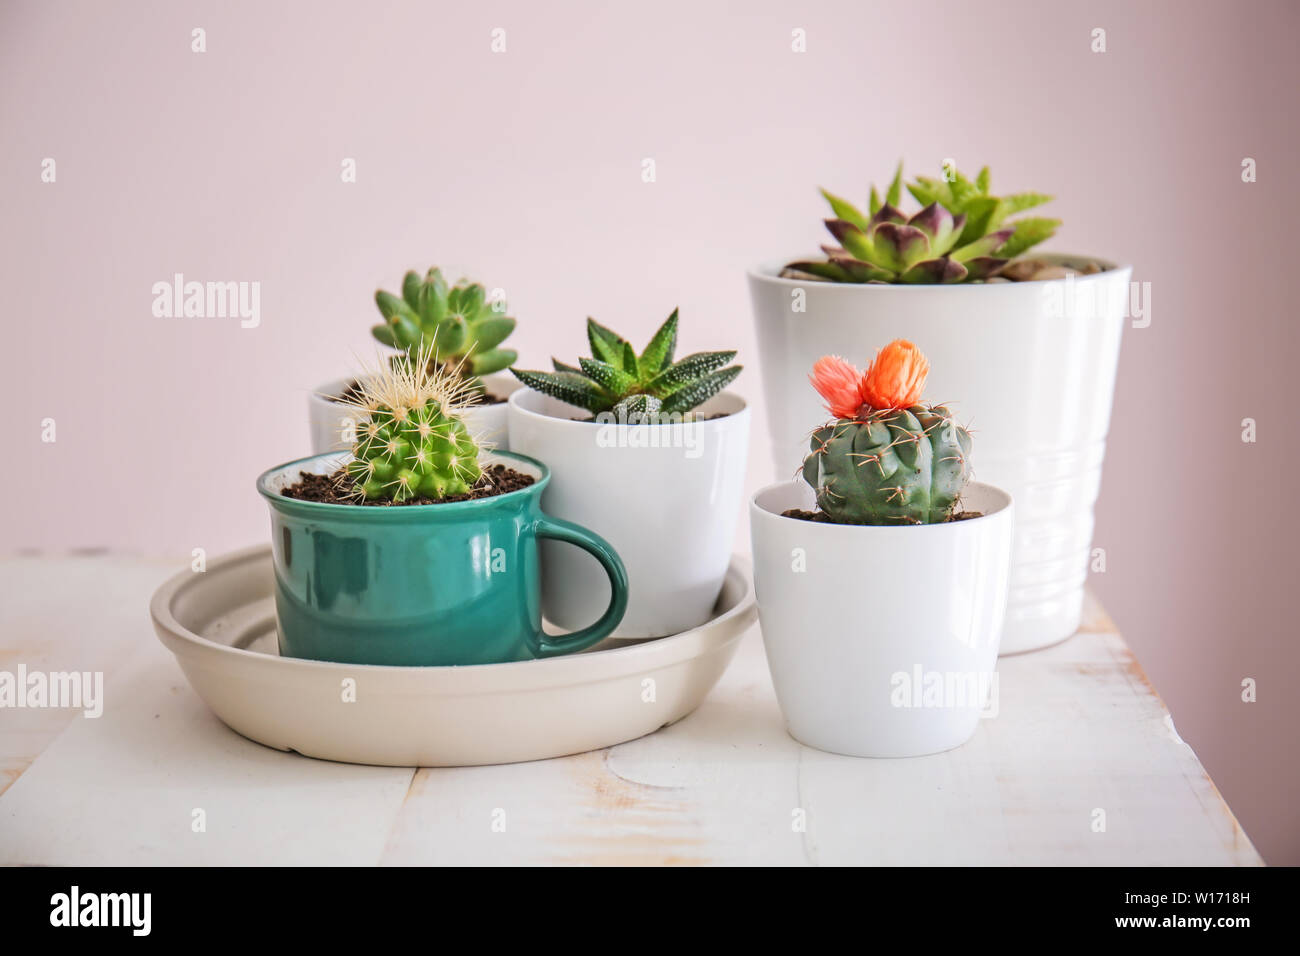 Succulents in pots on table Stock Photo